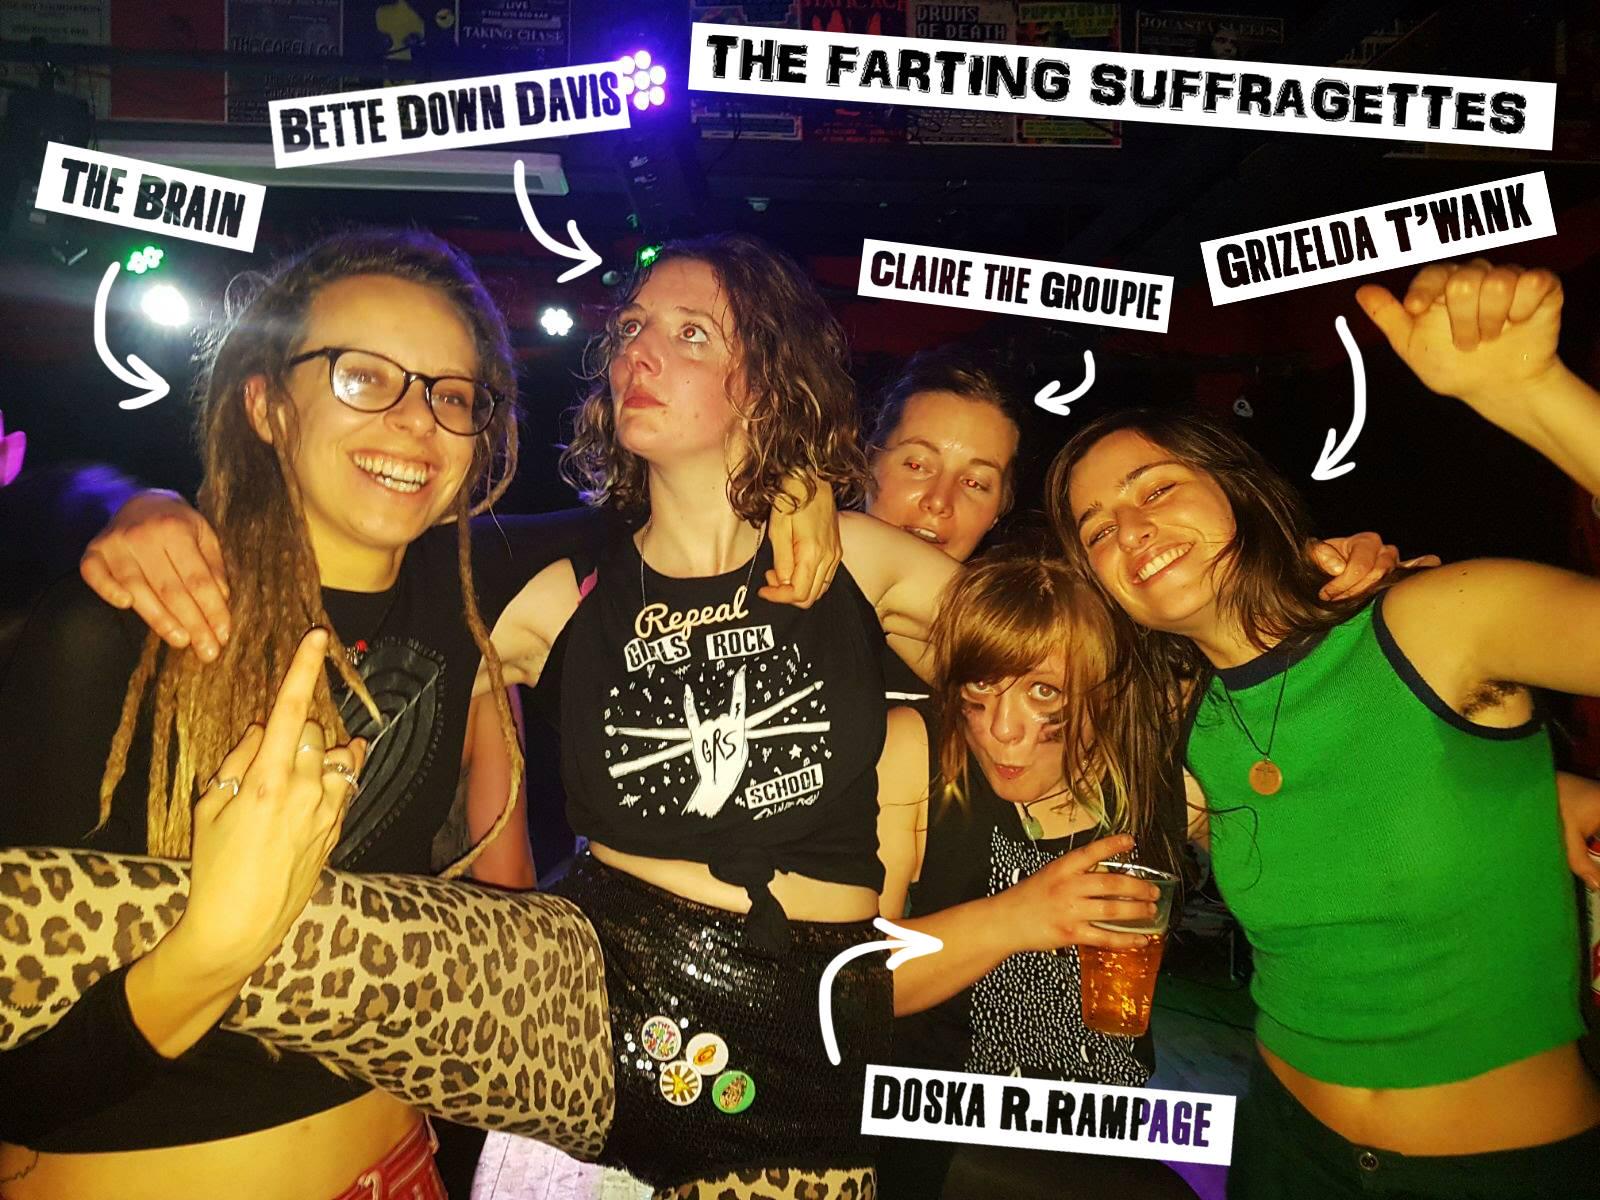 The Farting Suffragettes